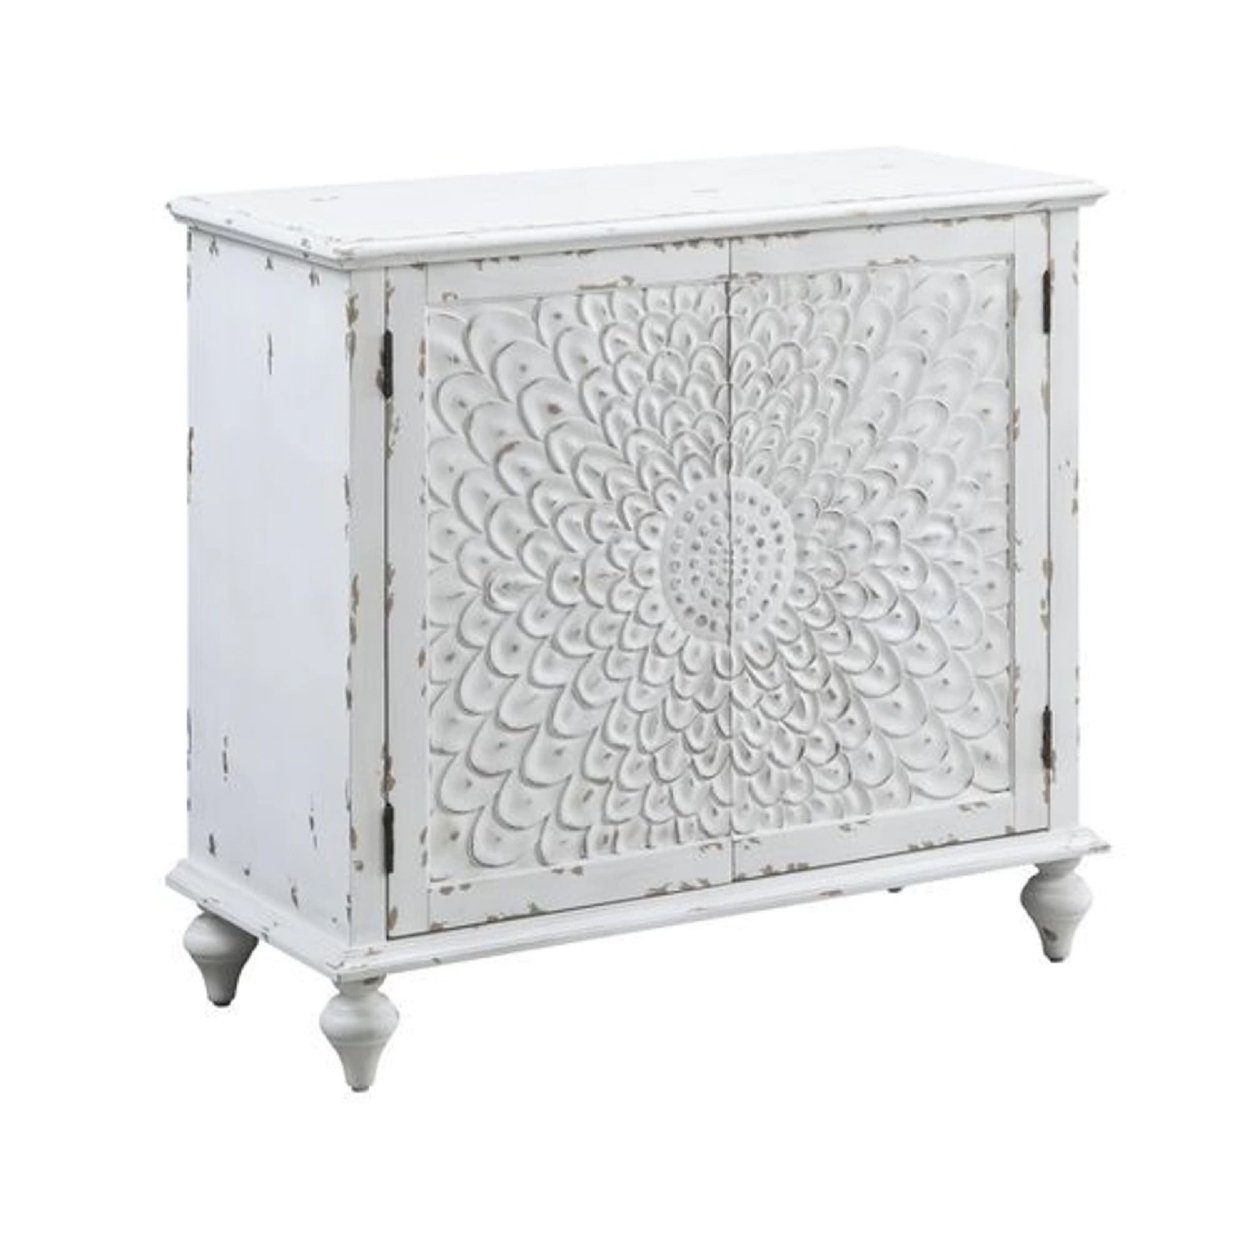 36 Inch Wood Console Buffet Cabinet, Carved Floral Pattern, Antique White- Saltoro Sherpi